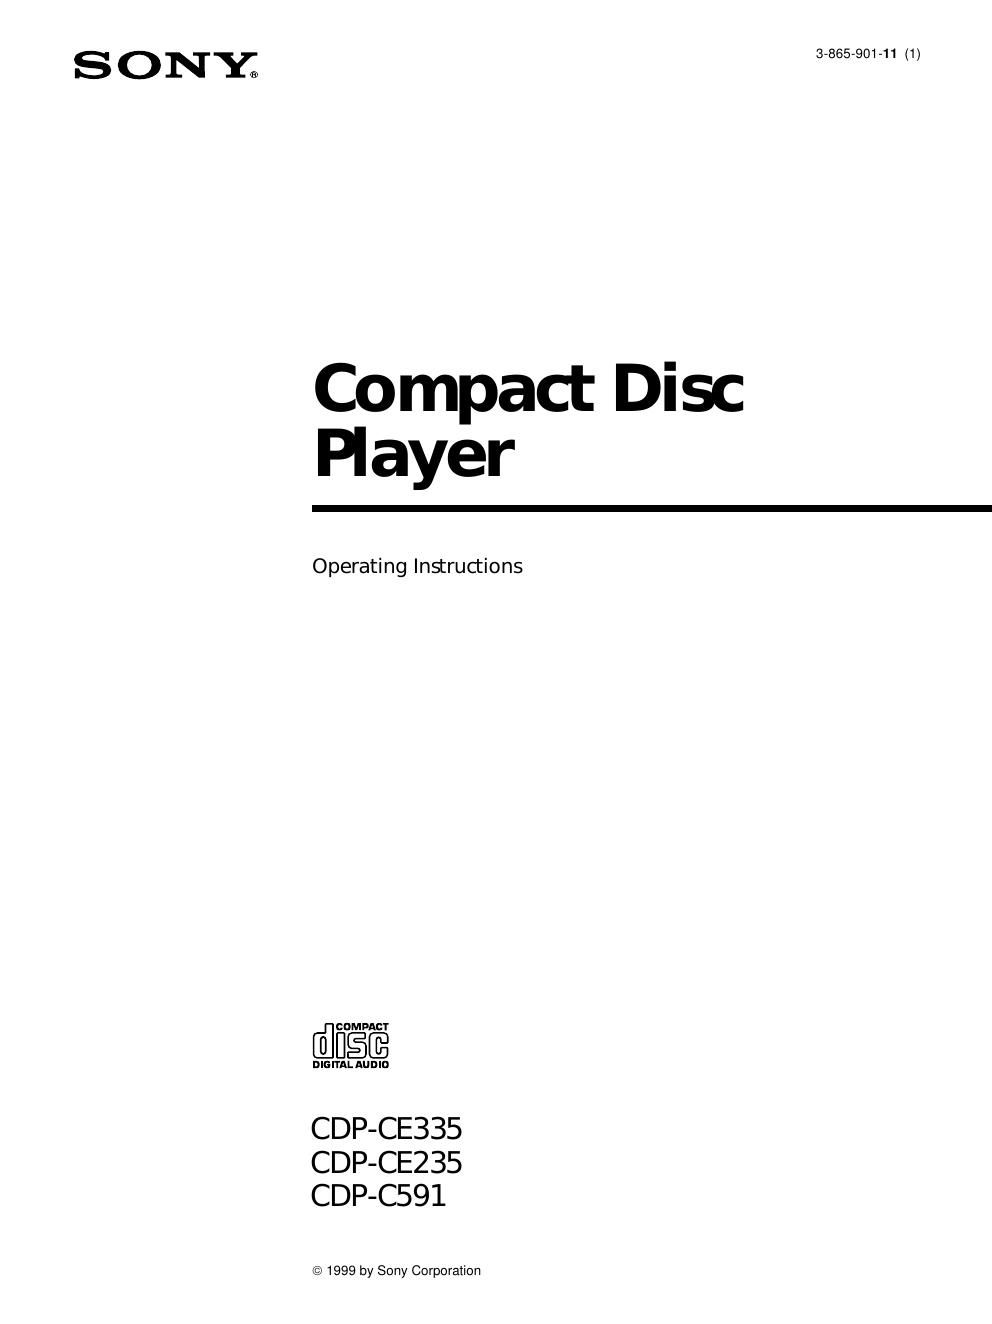 sony cdp c 591 owners manual